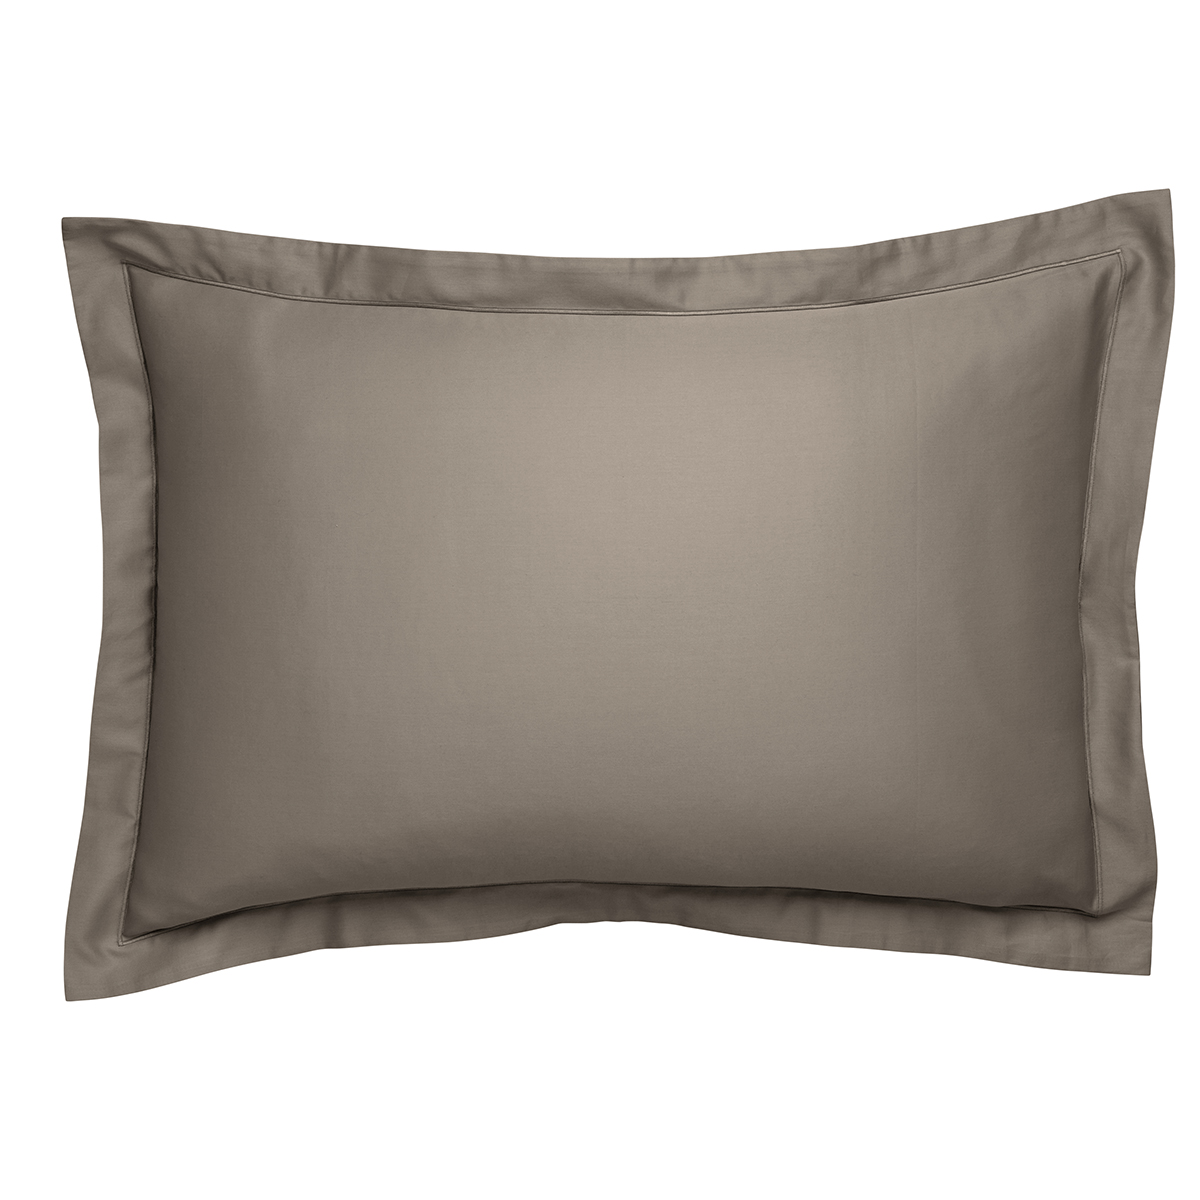 https://www.dodo.fr/media/catalog/product/t/o/to_r_satin_taupe_2.jpg?width=750&height=750&store=dodo_fr&image-type=image